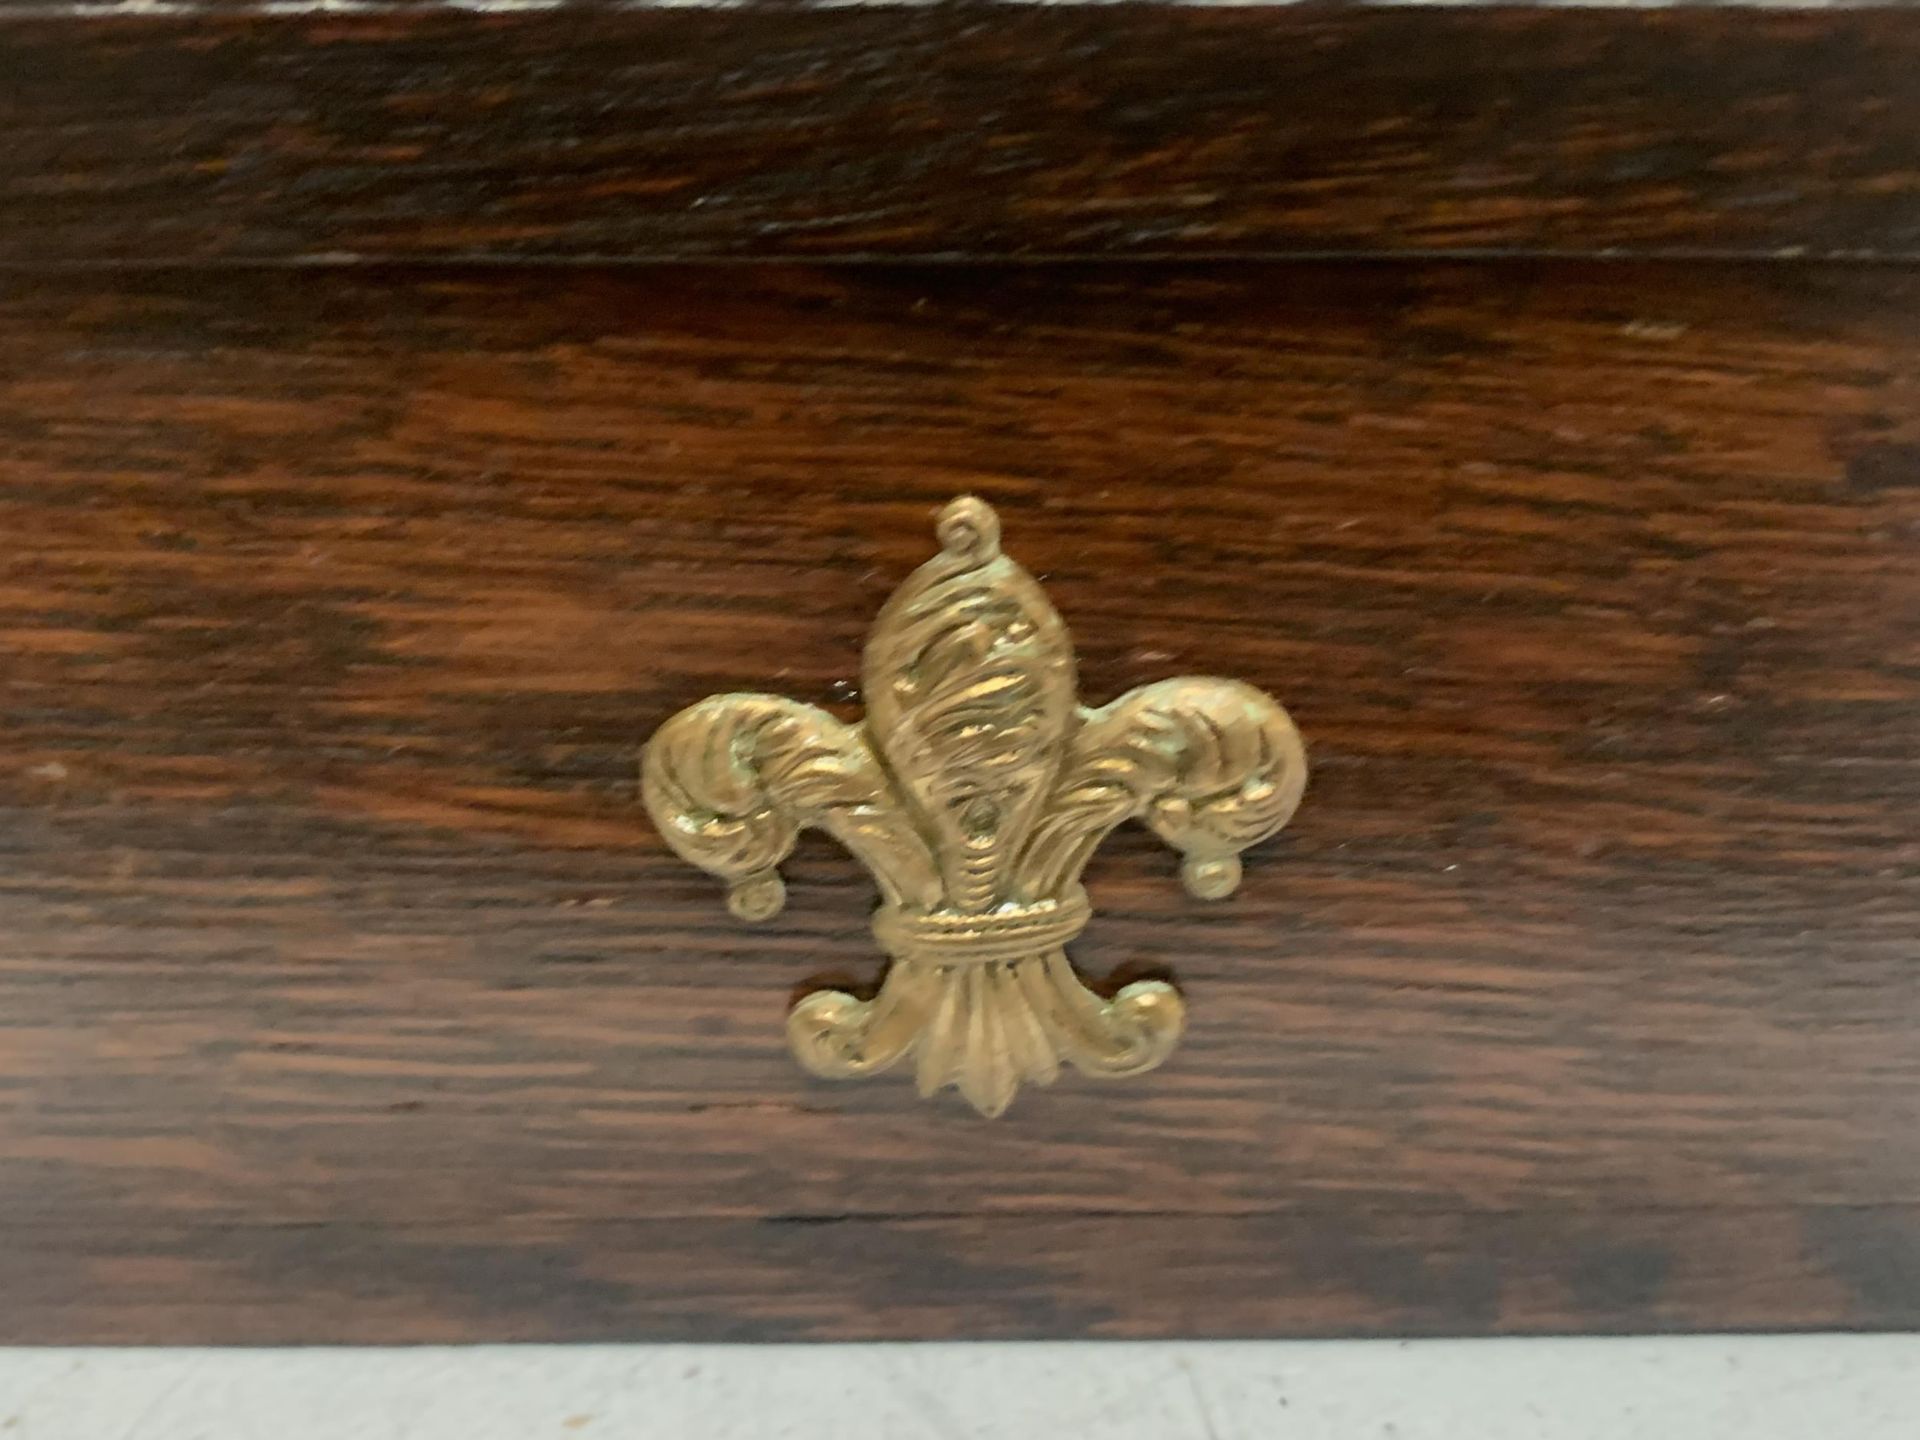 AN ORNATE WOODEN BOX WITH THE MANCHESTER COAT OF ARMS TO THE LID IN YELLOW METAL AND A FURTHER WHEAT - Image 2 of 5